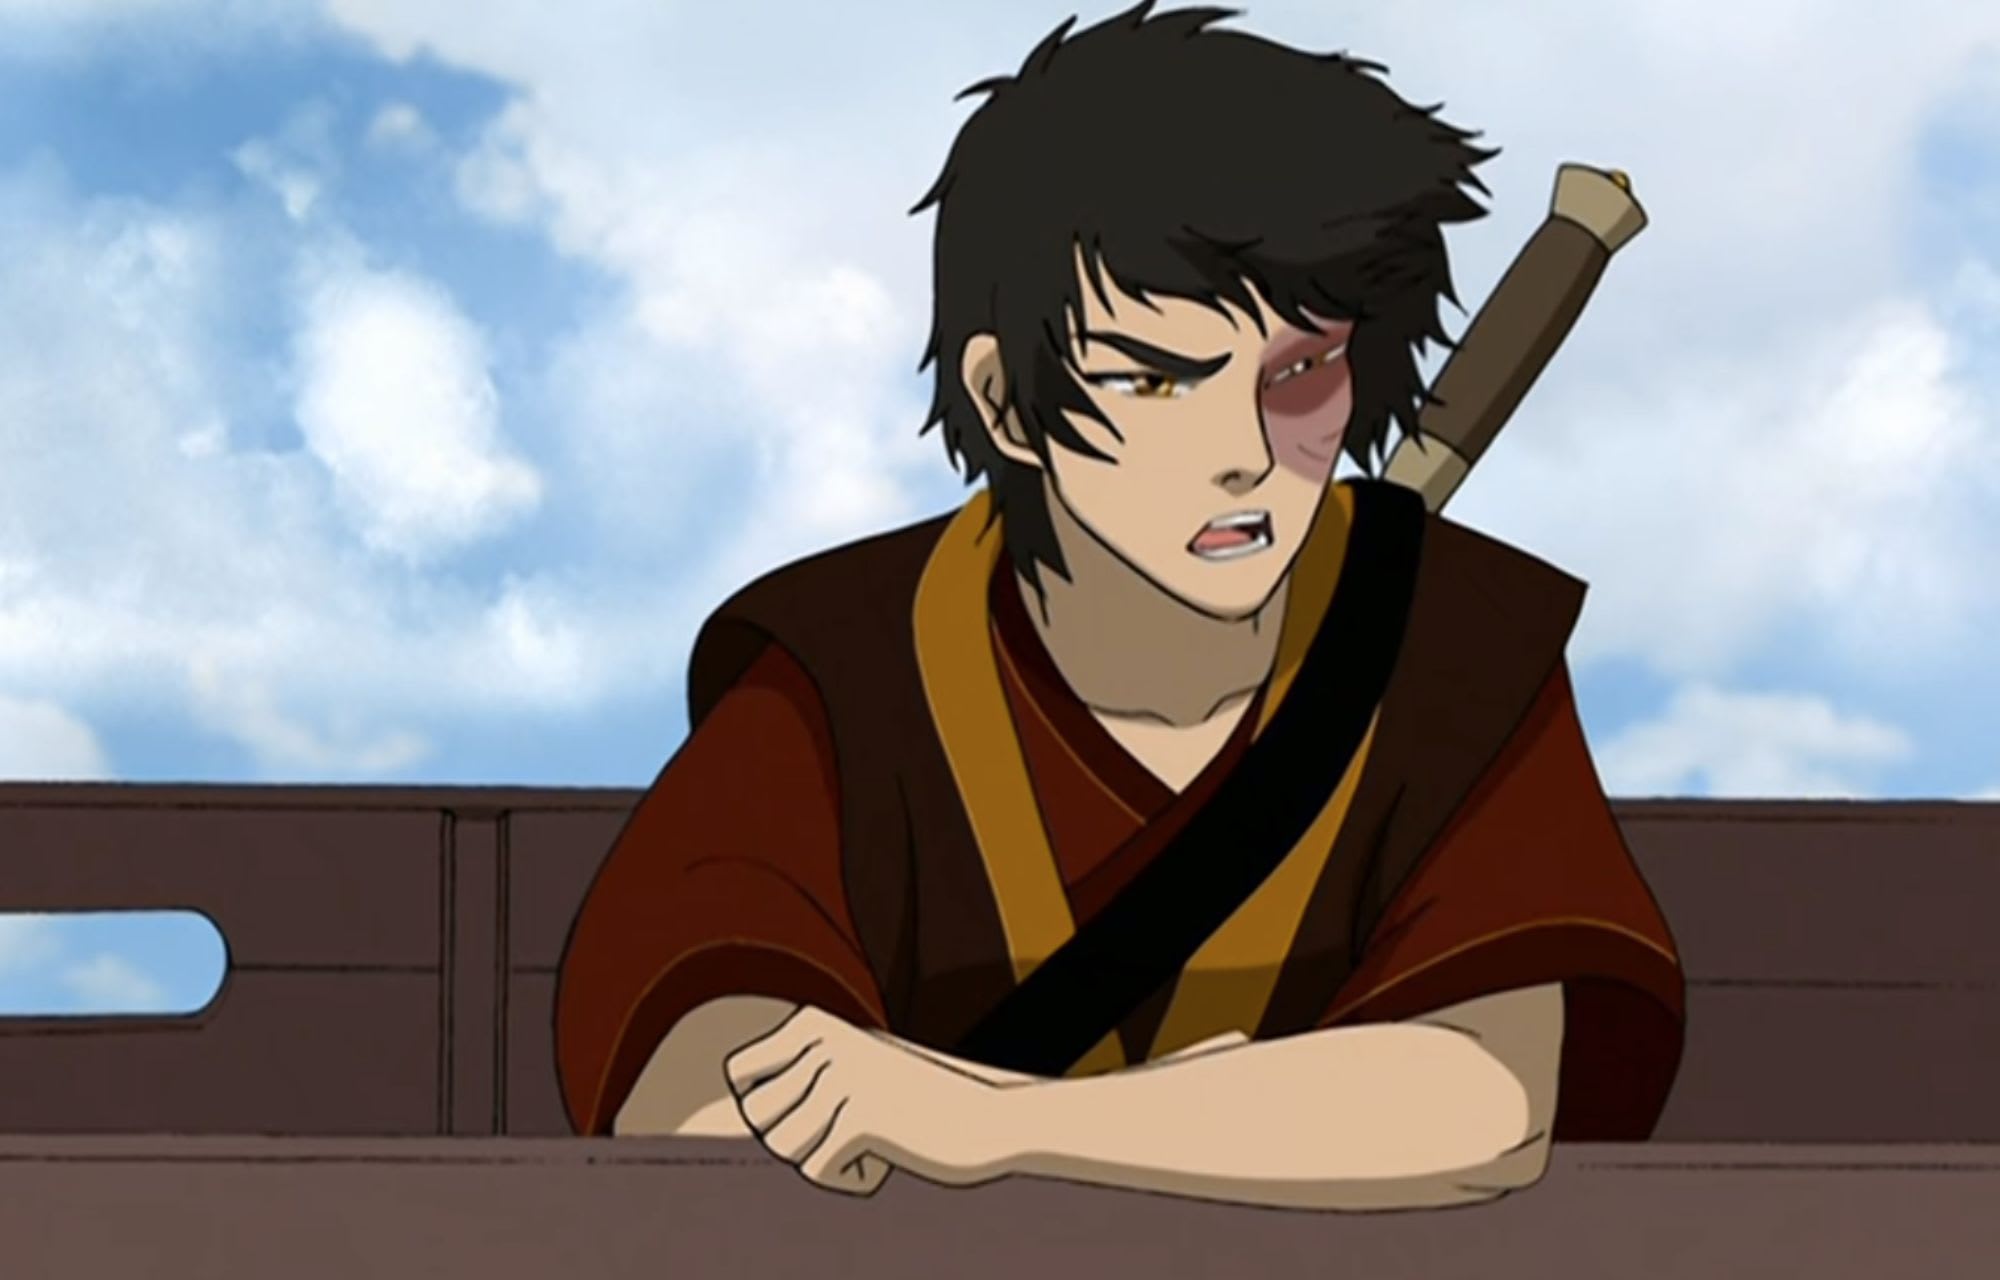 Avatar The Last Airbender movie about Zuko reportedly in the works